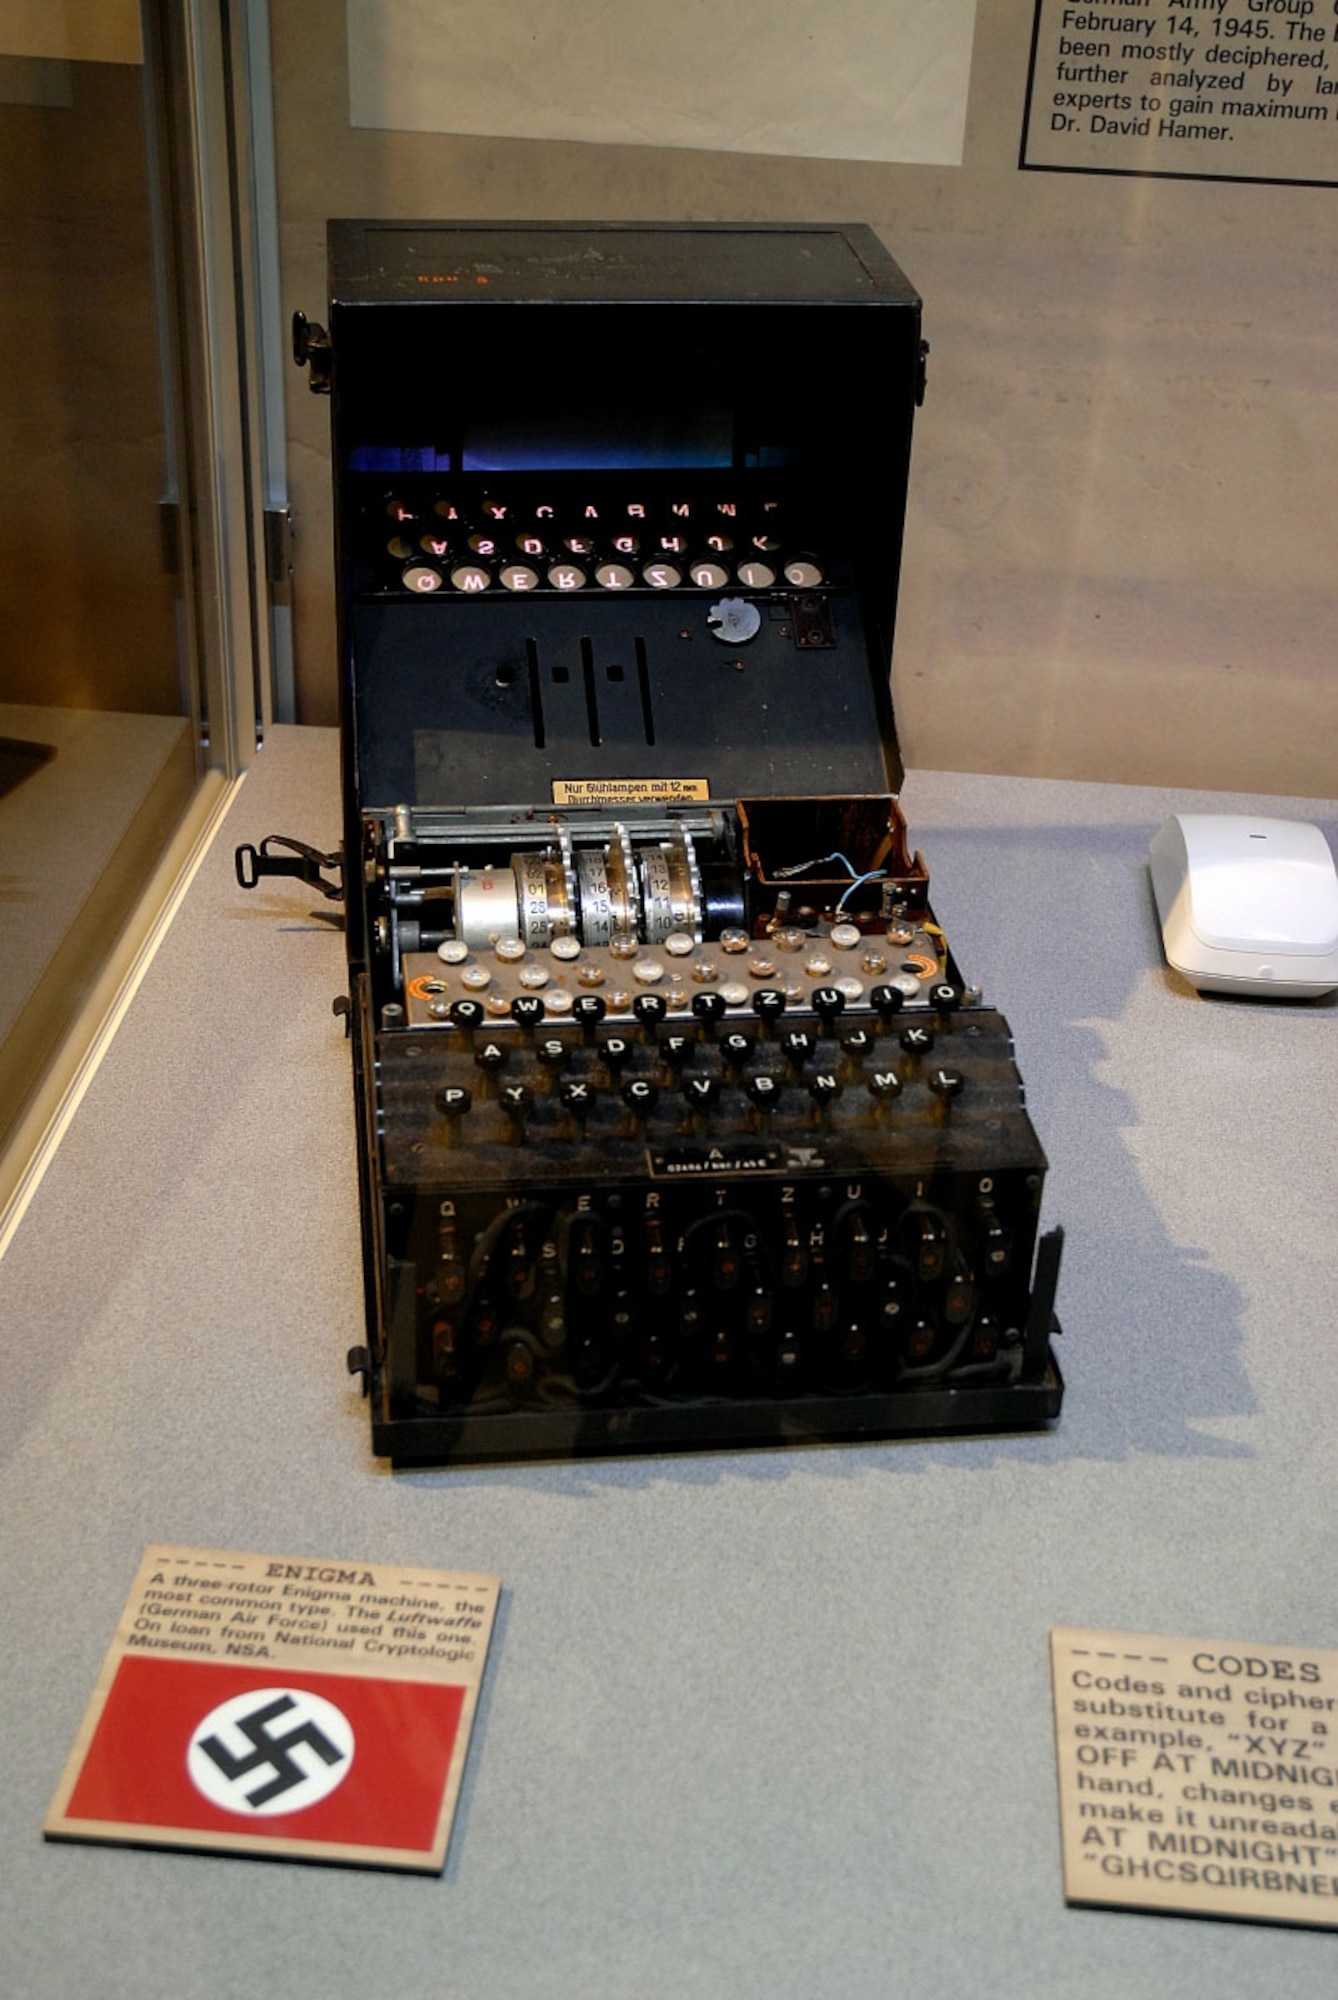 DAYTON, Ohio -- A three-rotor Enigma machine used by the Luftwaffe is on display with the cryptology exhibit in the World War II Gallery at the National Museum of the United States Air Force. (U.S. Air Force photo)